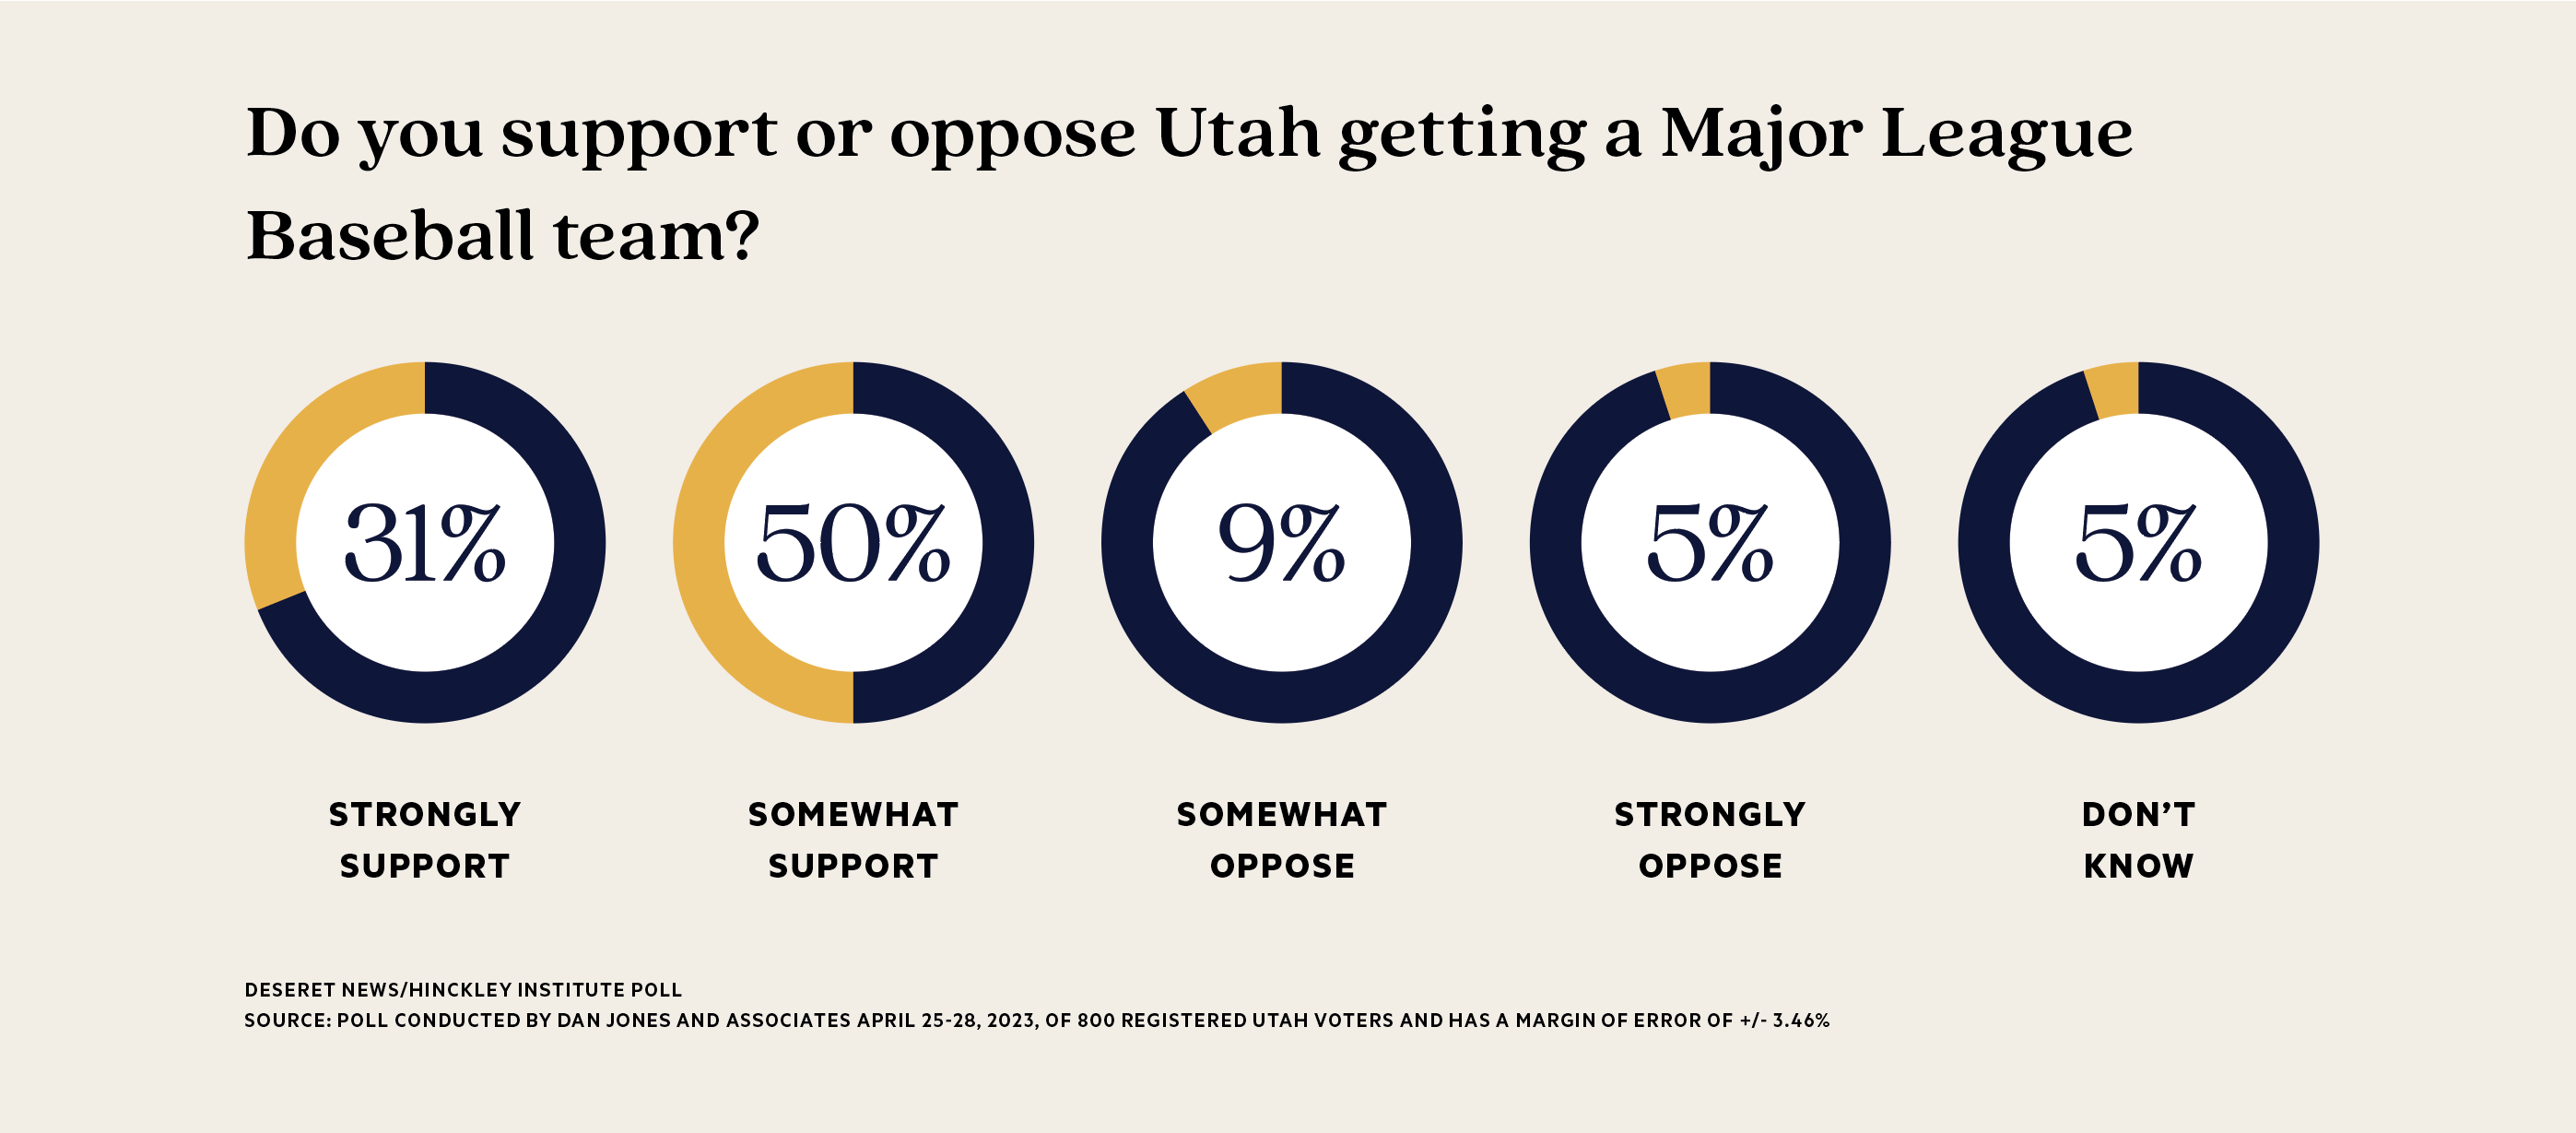 An investment in an MLB franchise would be an investment in Utah’s future, with a majority of Utahns supporting the effort.